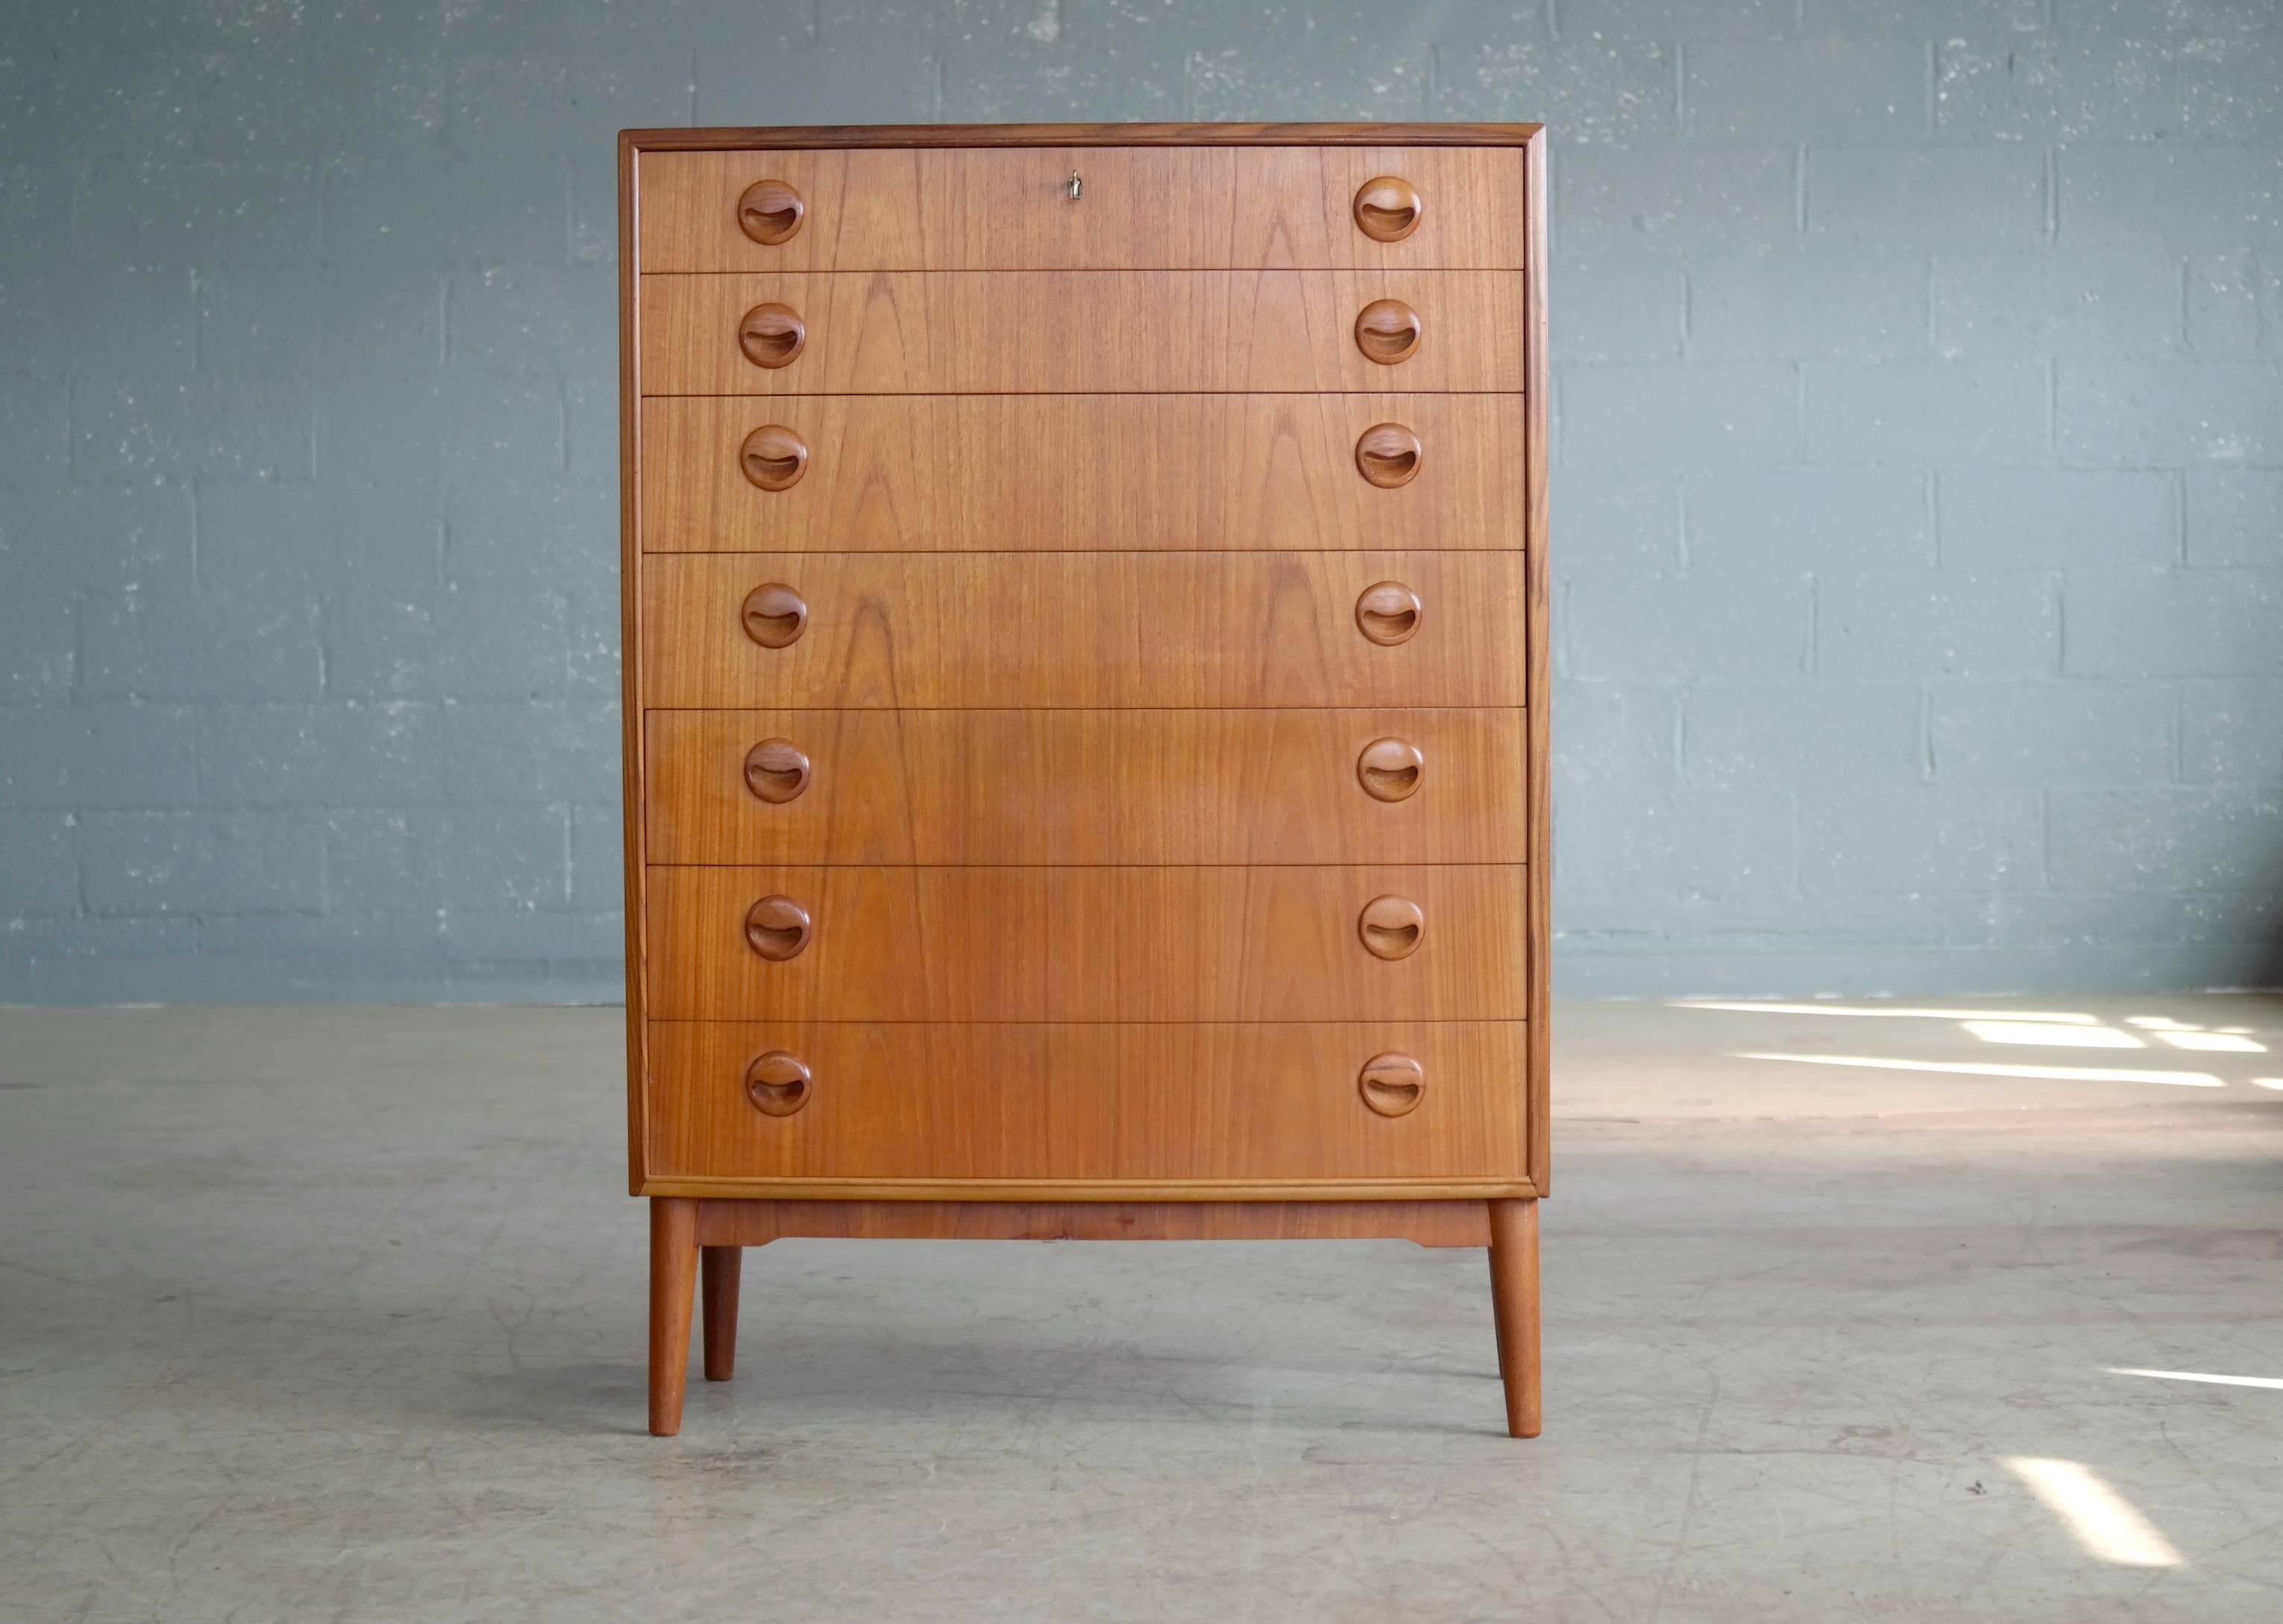 Beautiful Danish teak high-boy dresser or chest of drawers designed by Kai Kristiansen in the 1950s. Teak veneer with edges of solid teak and pulls carved from solid teak raised on solid tapered teak legs. All drawers solid ply. Locking top drawer